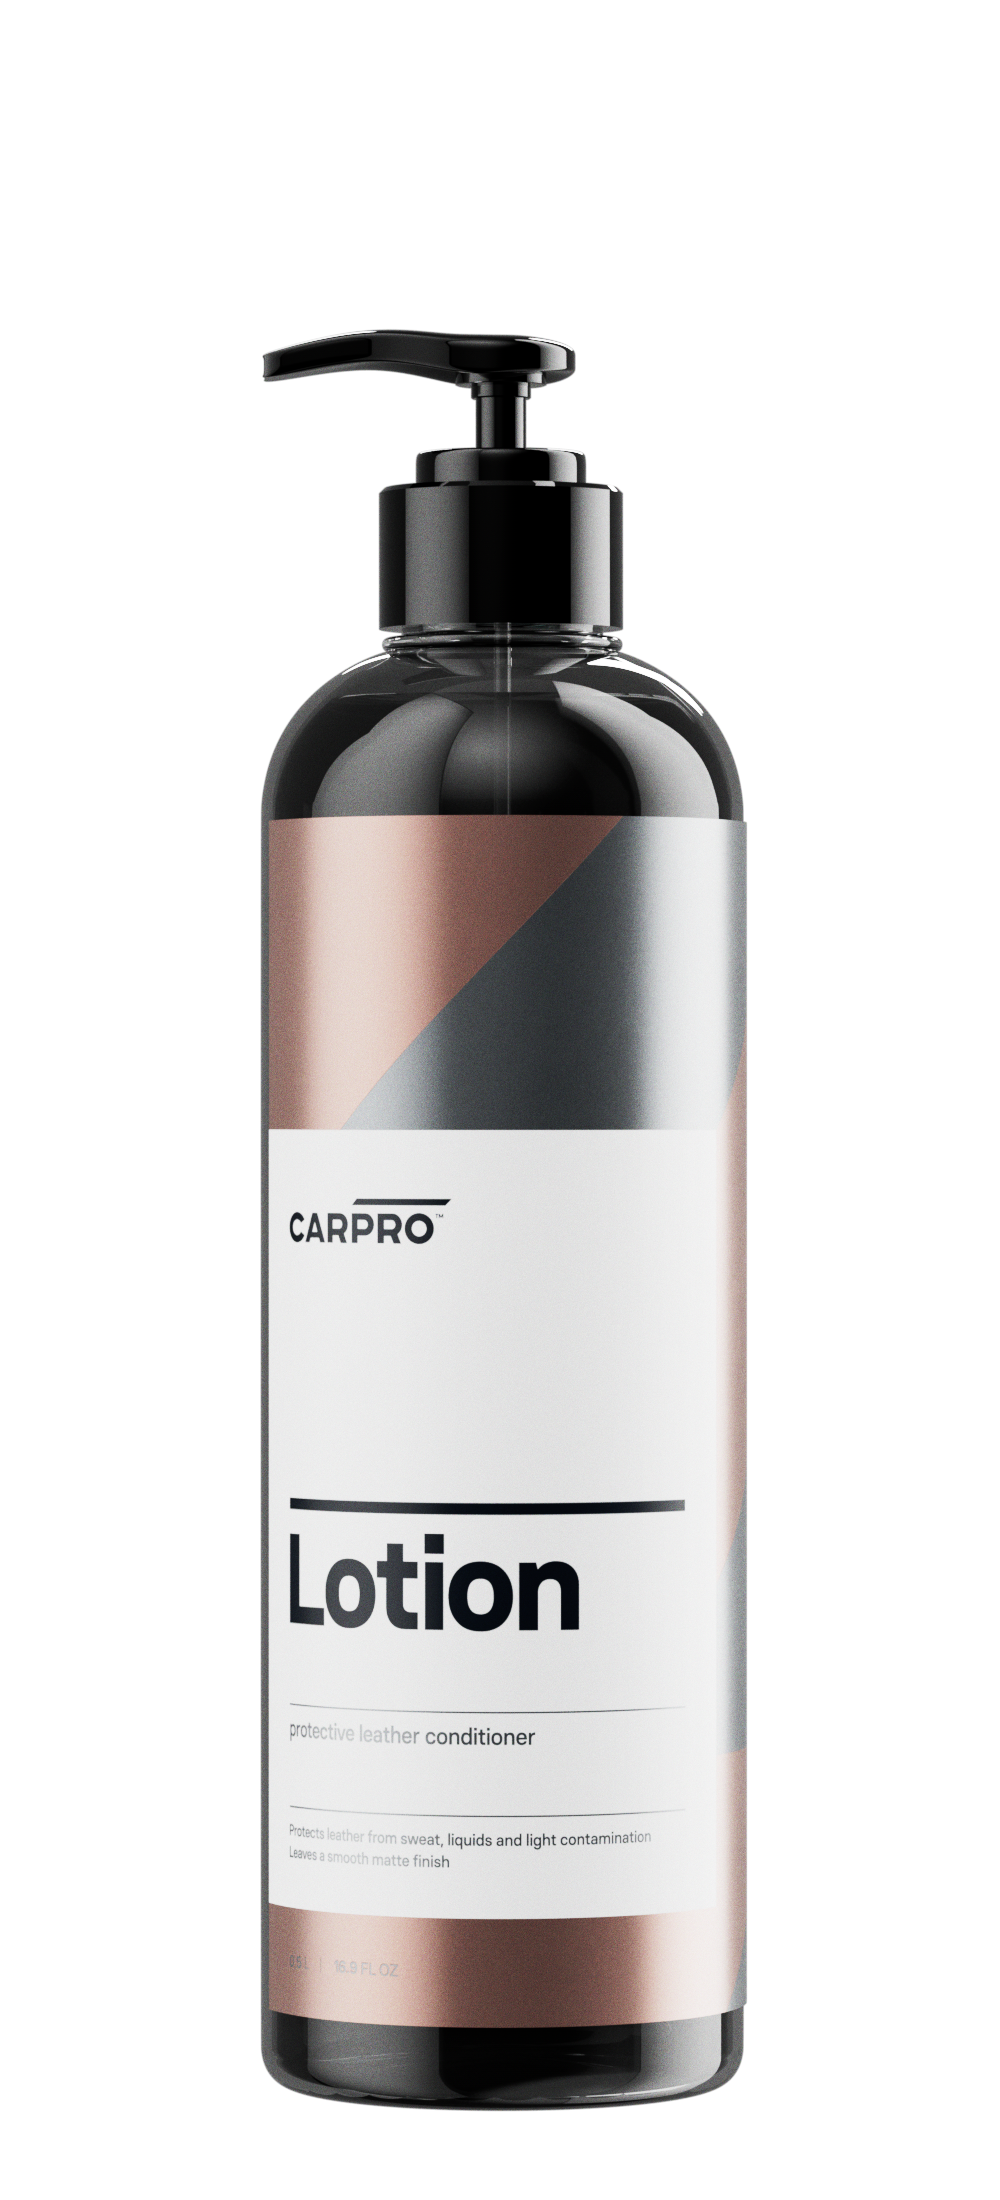 CARPRO - Lotion 500ml (Protection for leather)